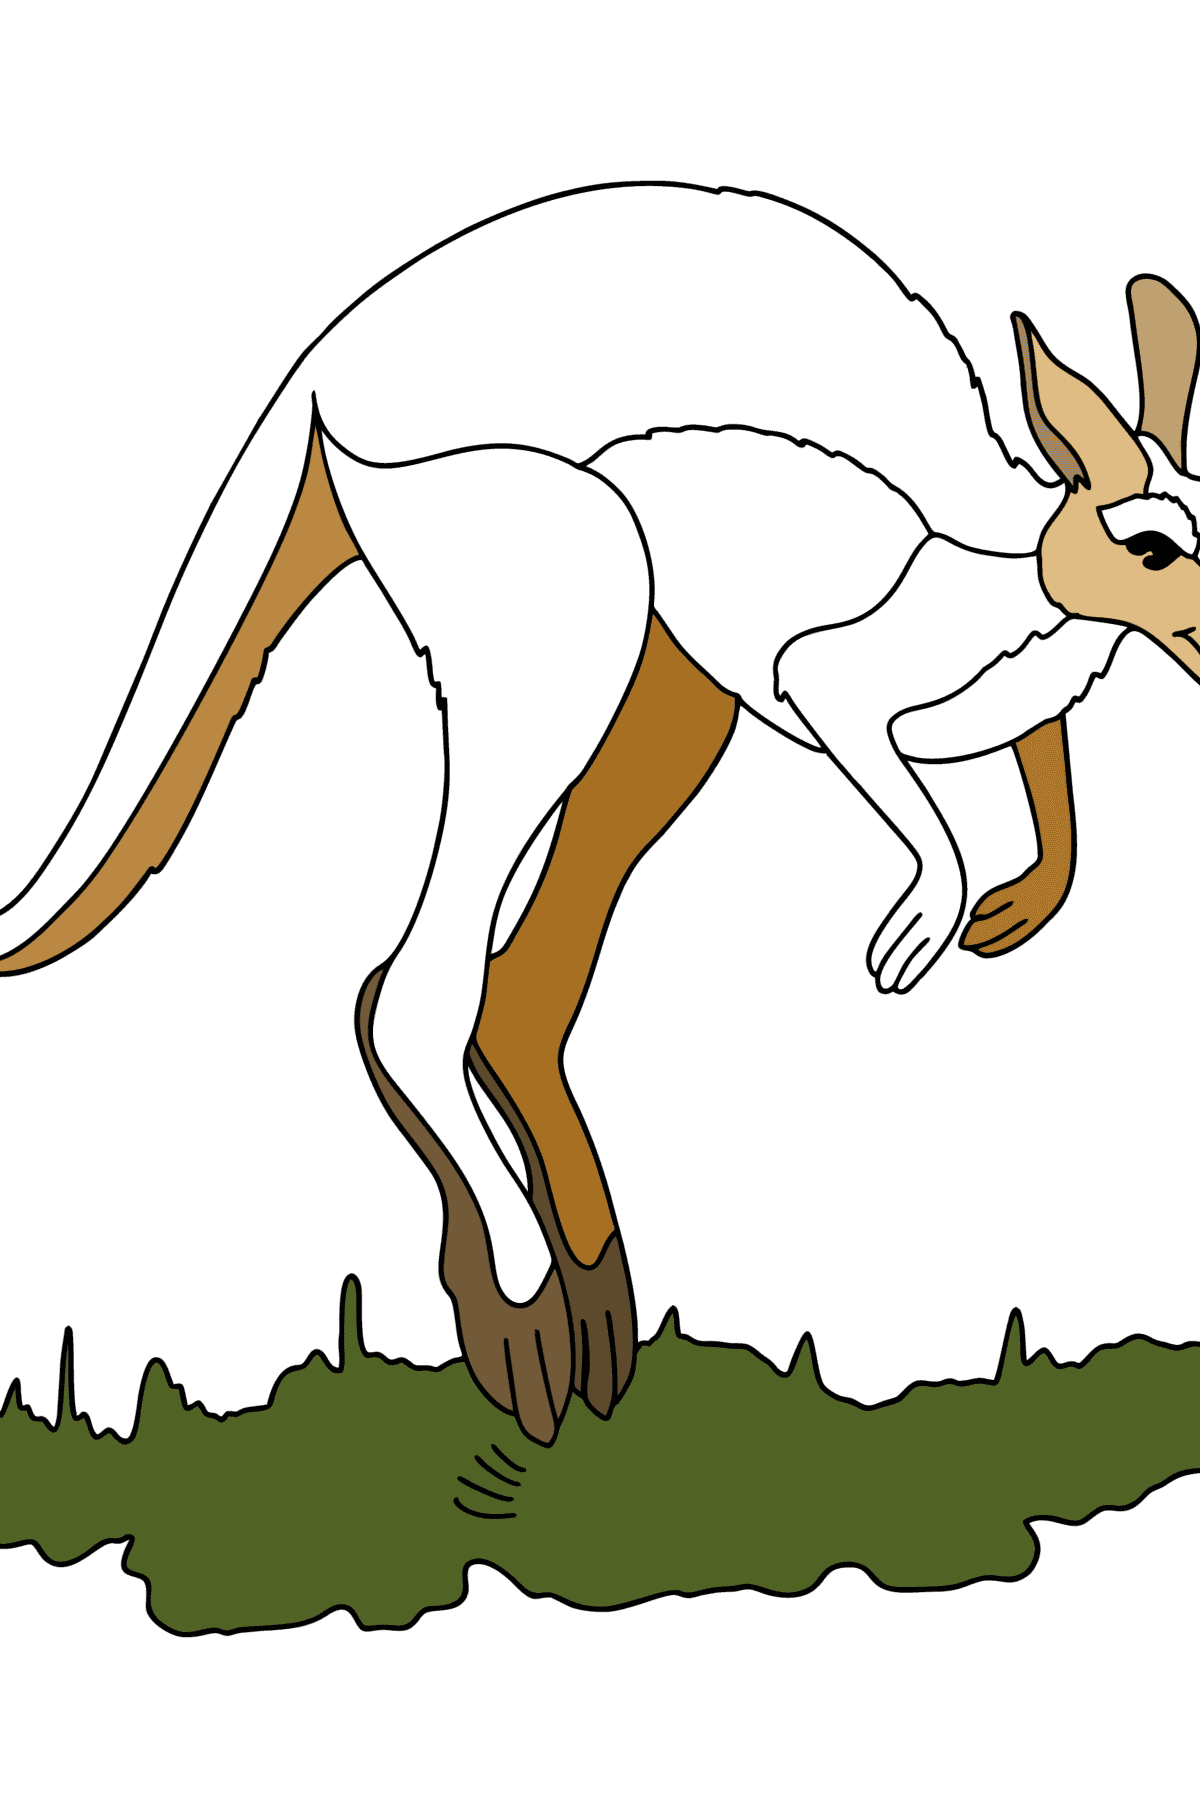 Jumping Kangaroo coloring page - Coloring Pages for Kids